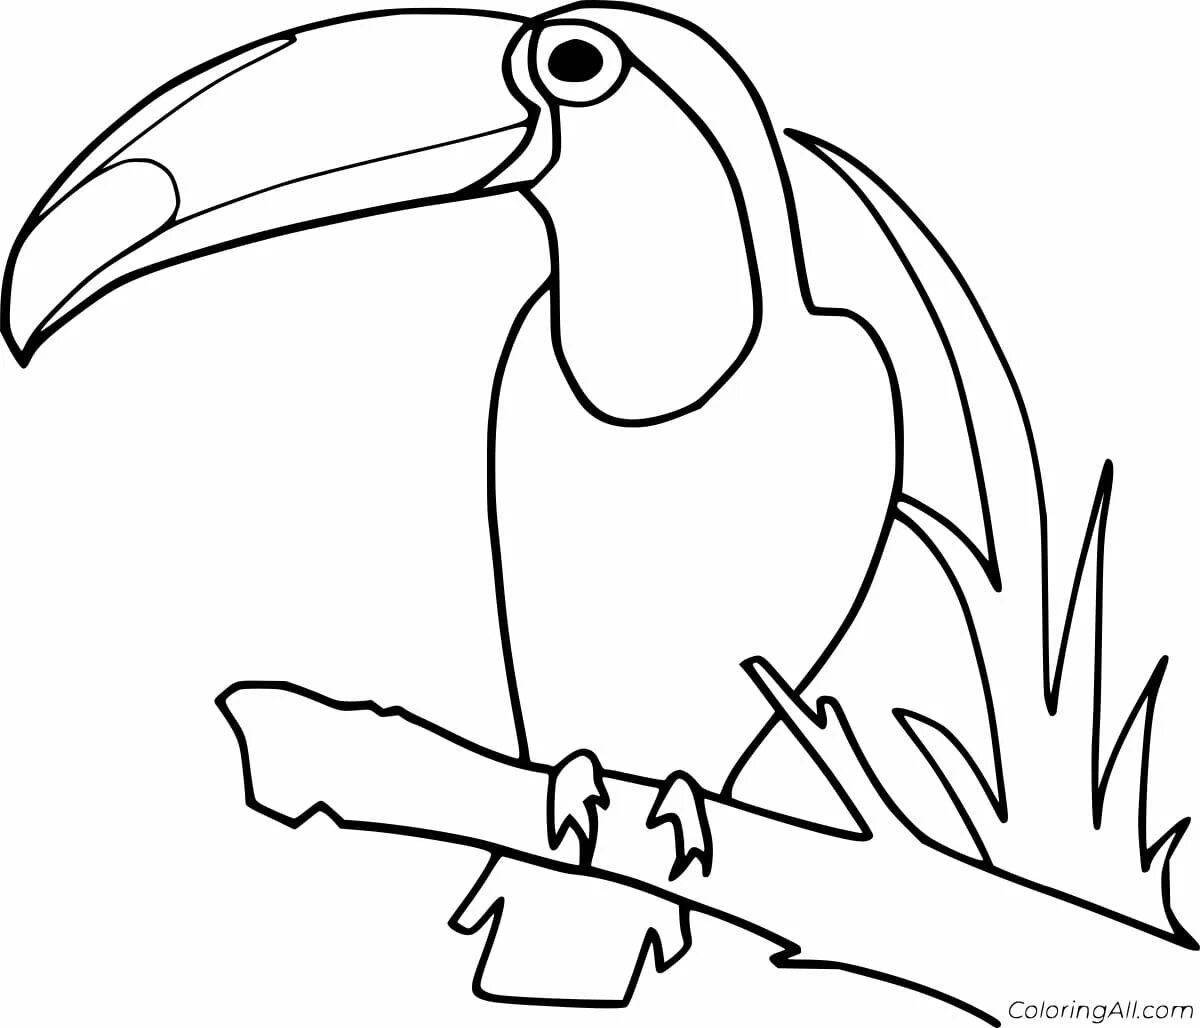 Colorful toucan coloring book for kids